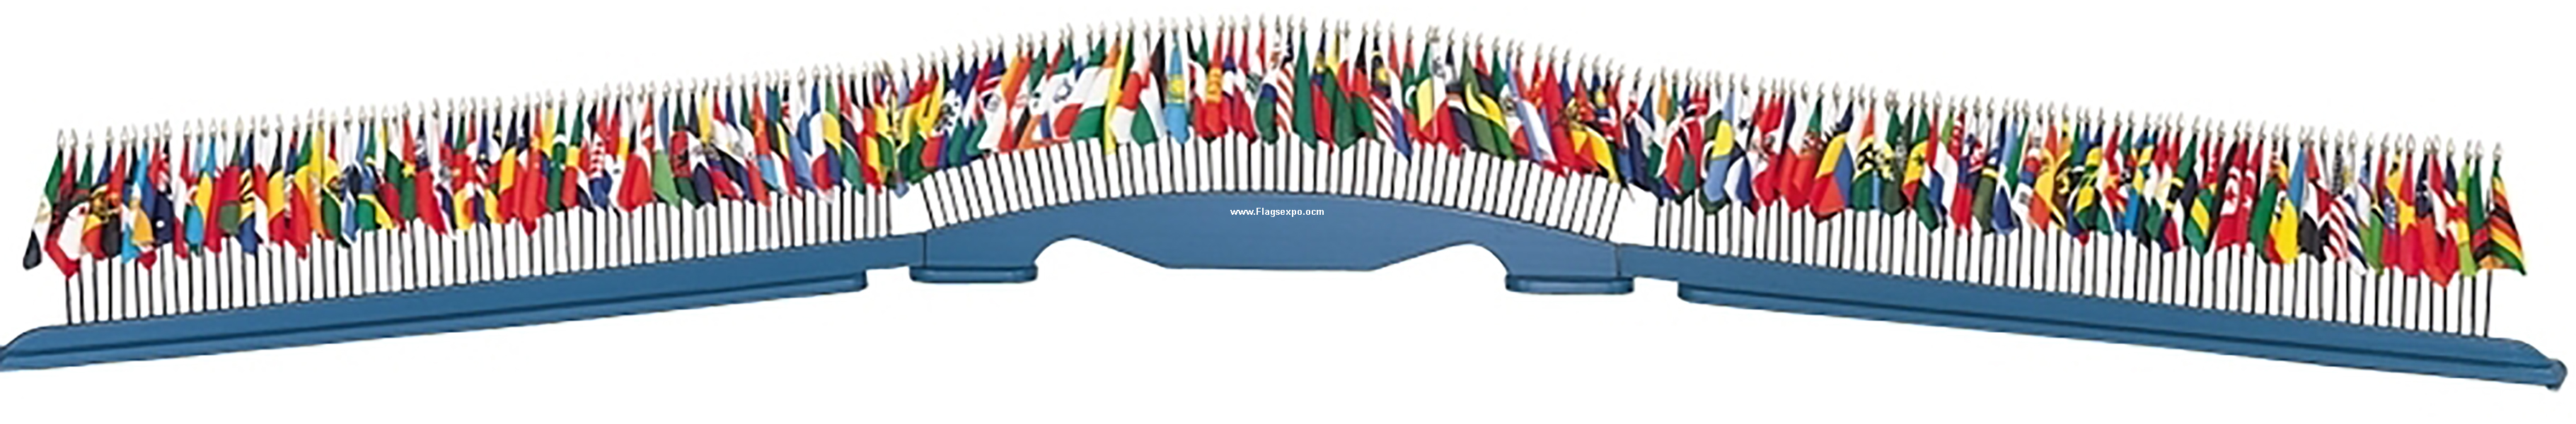 Flags of UN Members Nations